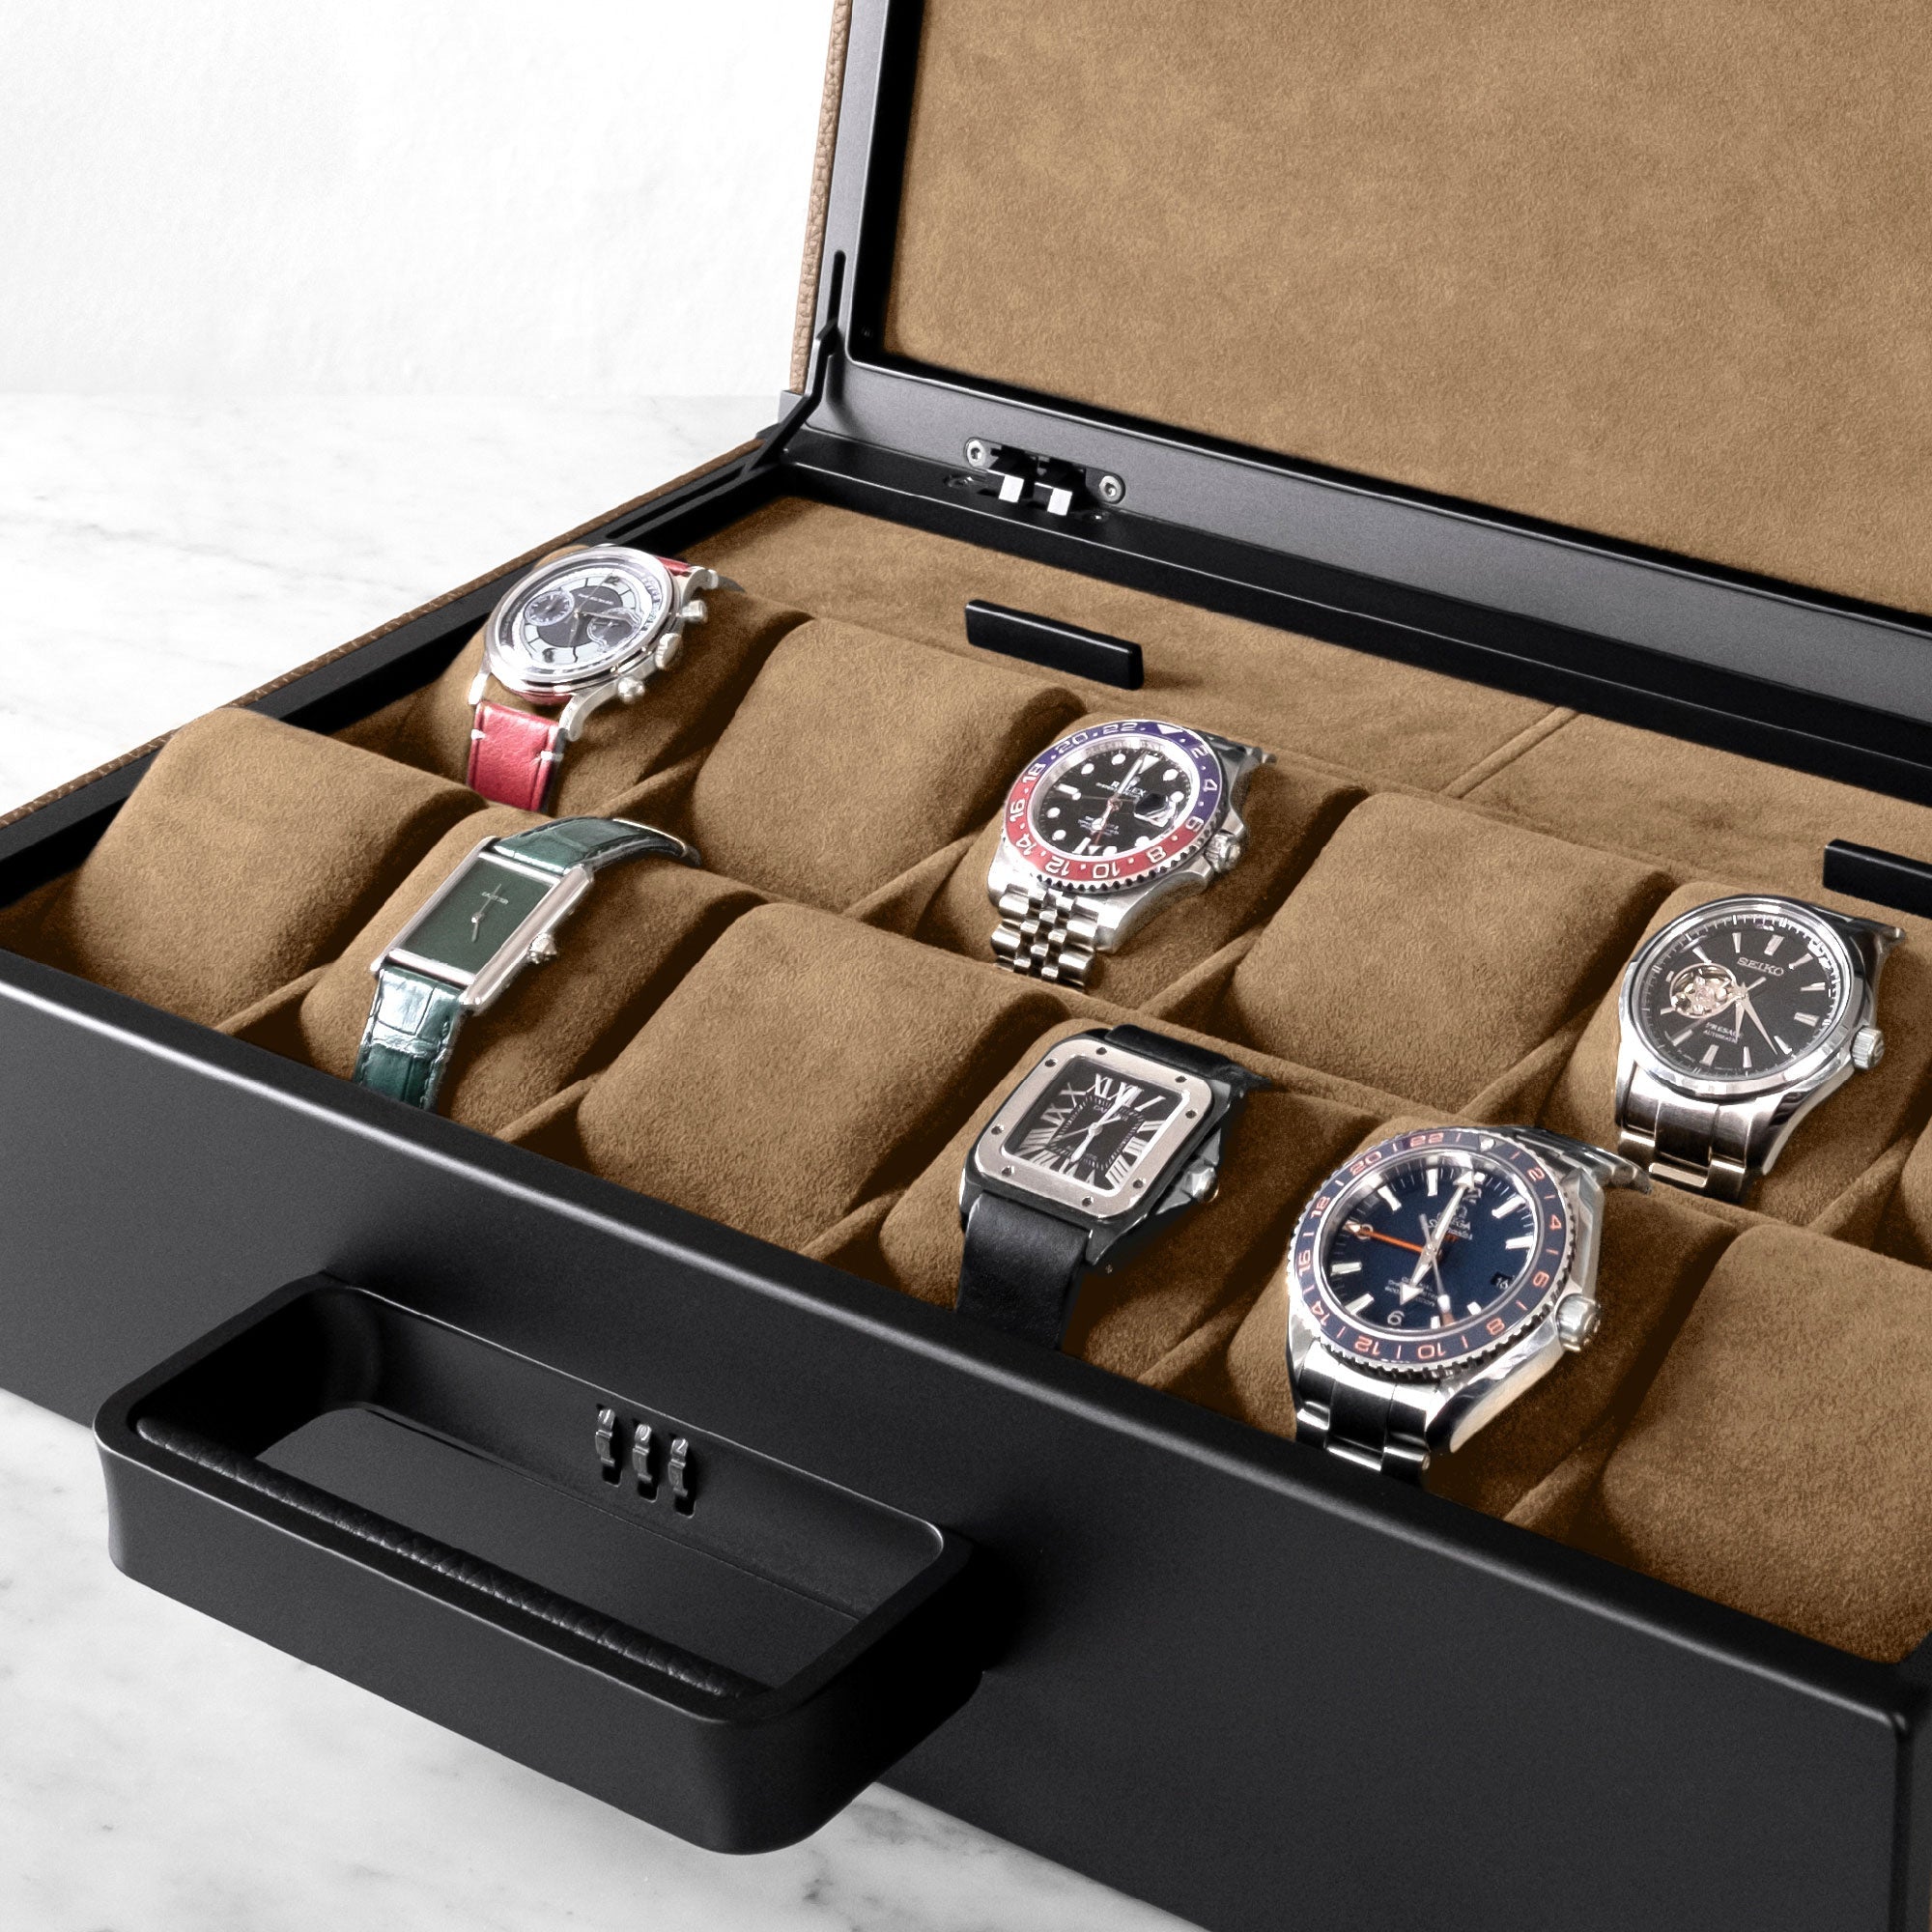 Lifestyle shot of Mackenzie Watch briefcase 12 filled with luxury watches including Rolex, Cartier and Omega